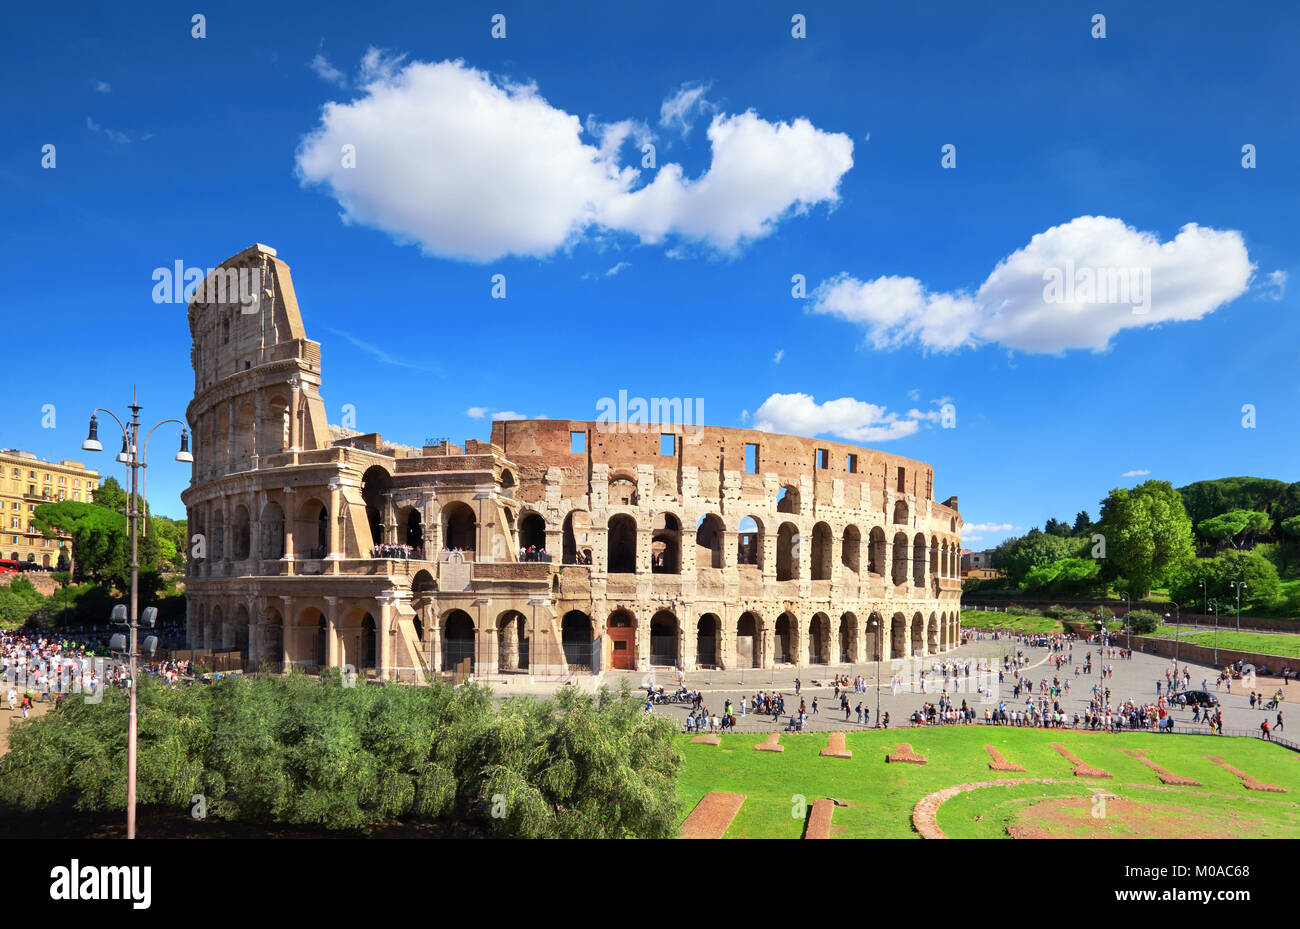 Rome, Italy. View of Colosseum from the Palatine Hill on a sunny day with blue sky and clouds. Stock Photo